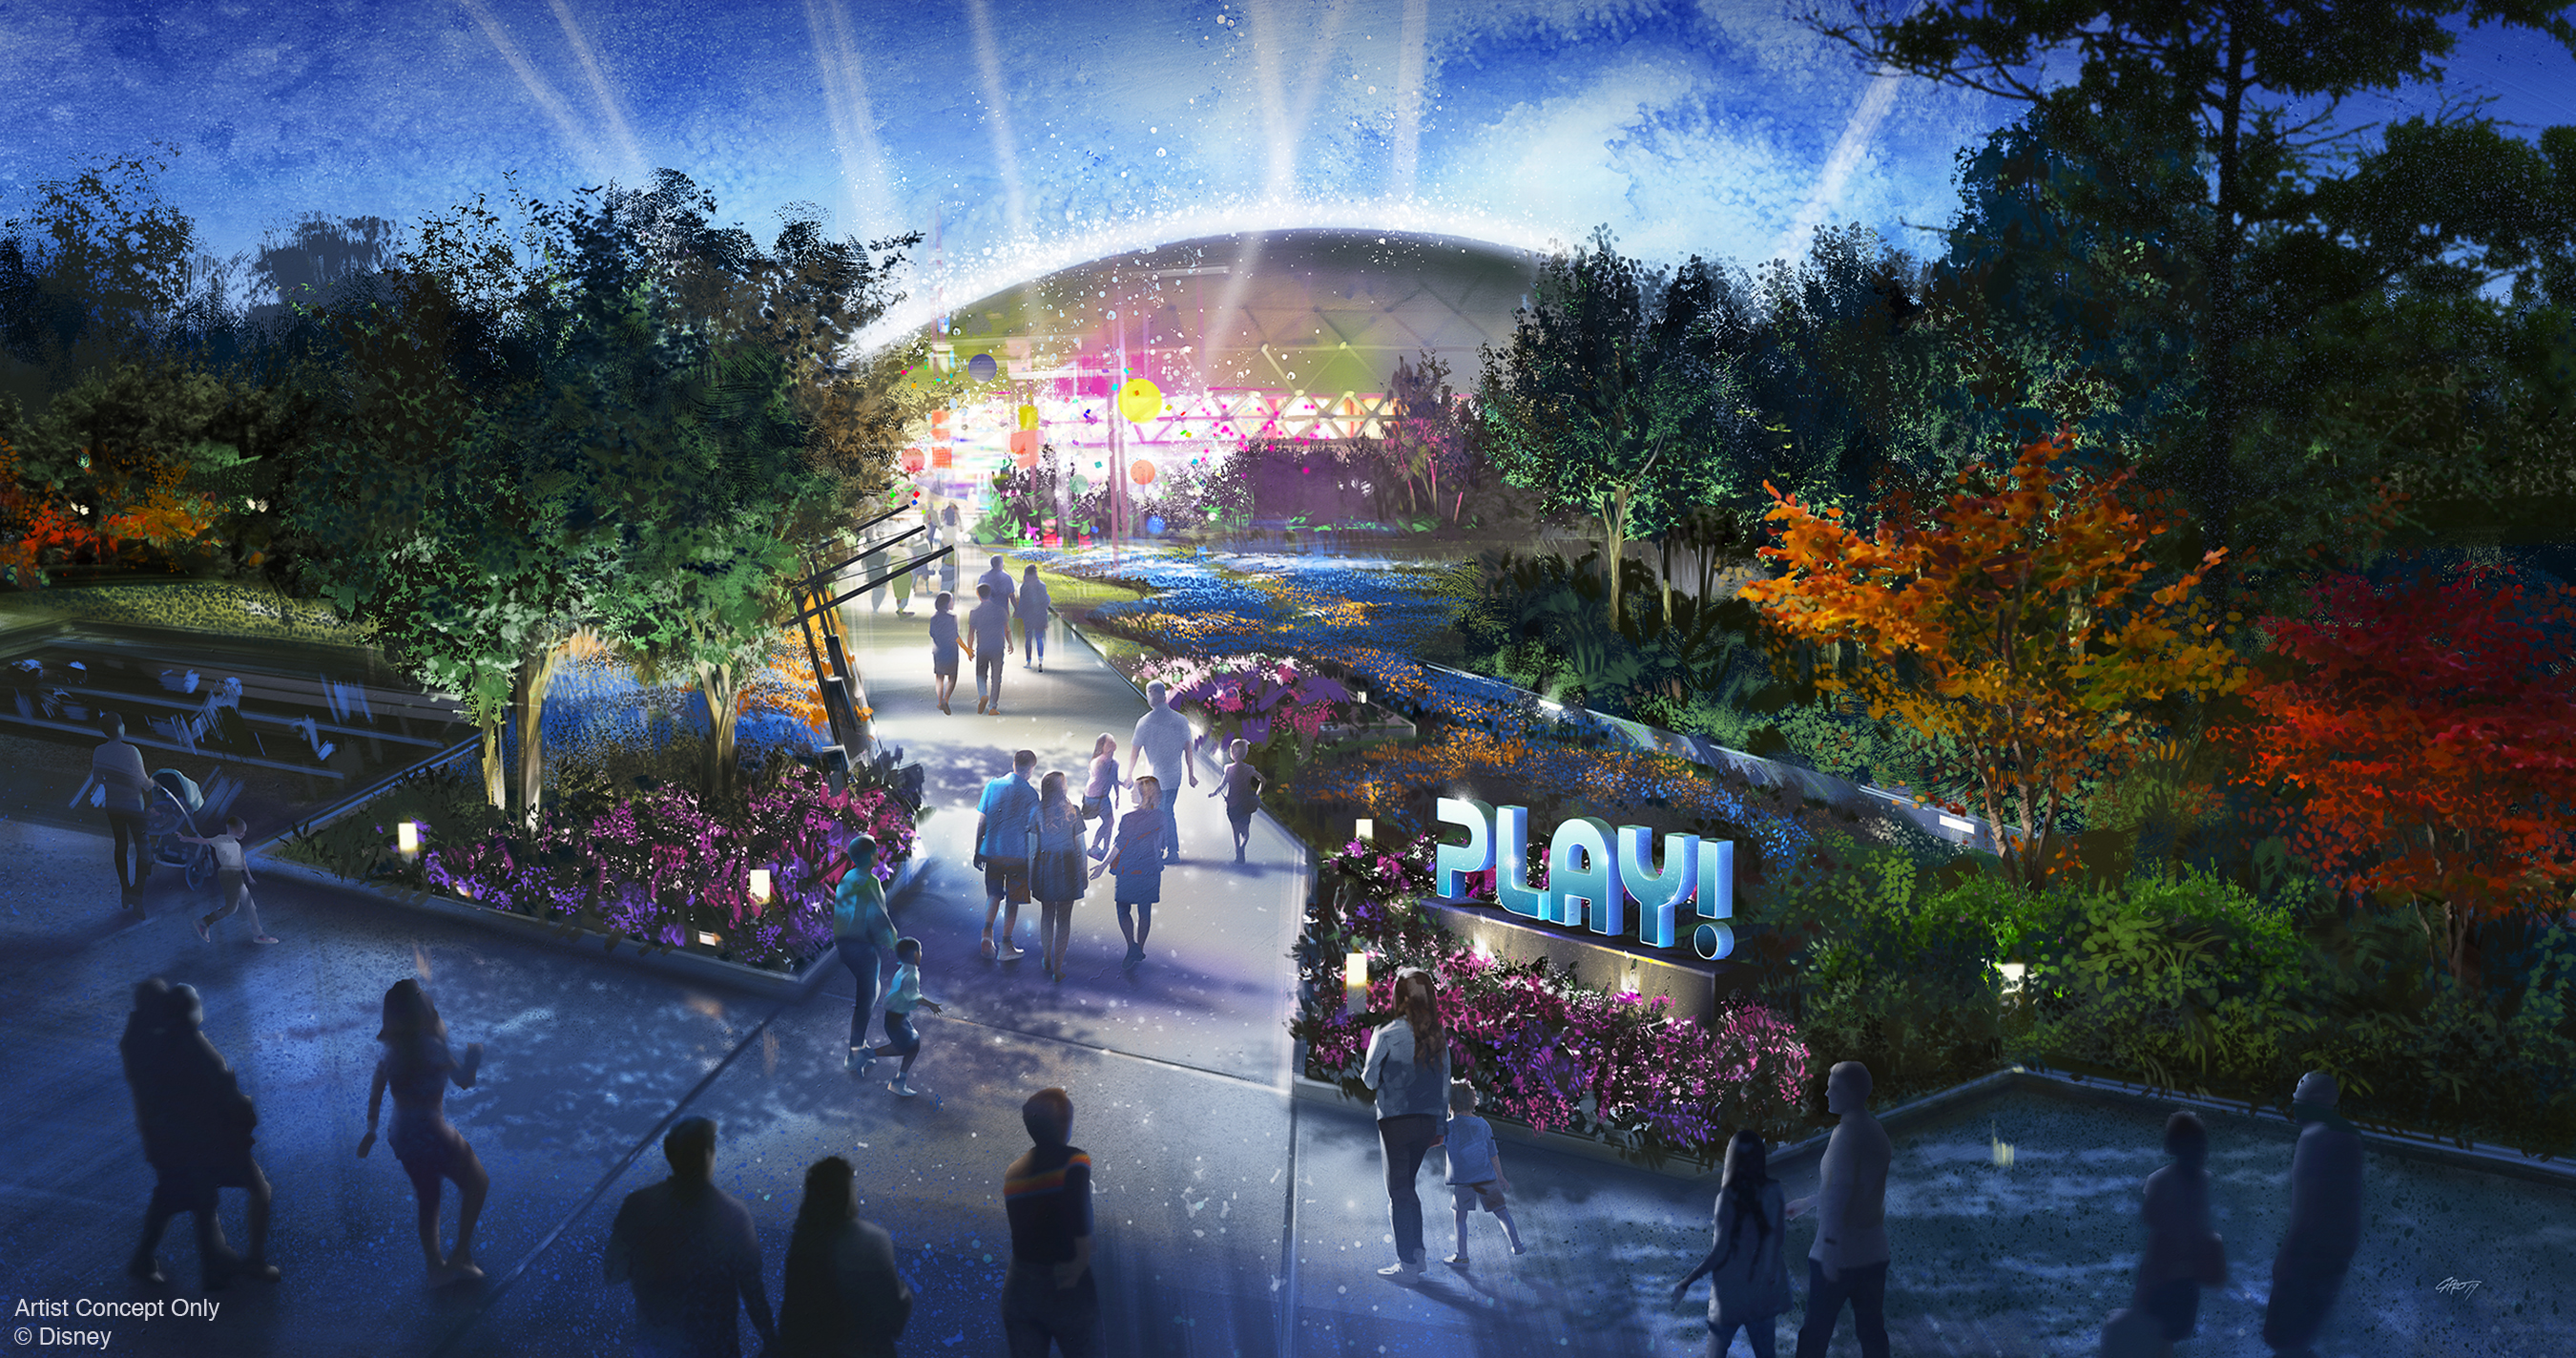 The PLAY pavilion was announced August 2019 as&nbsp;an interactive city bursting with games, activities and experiences that connect them with friends, family and Disney characters – both real and virtual